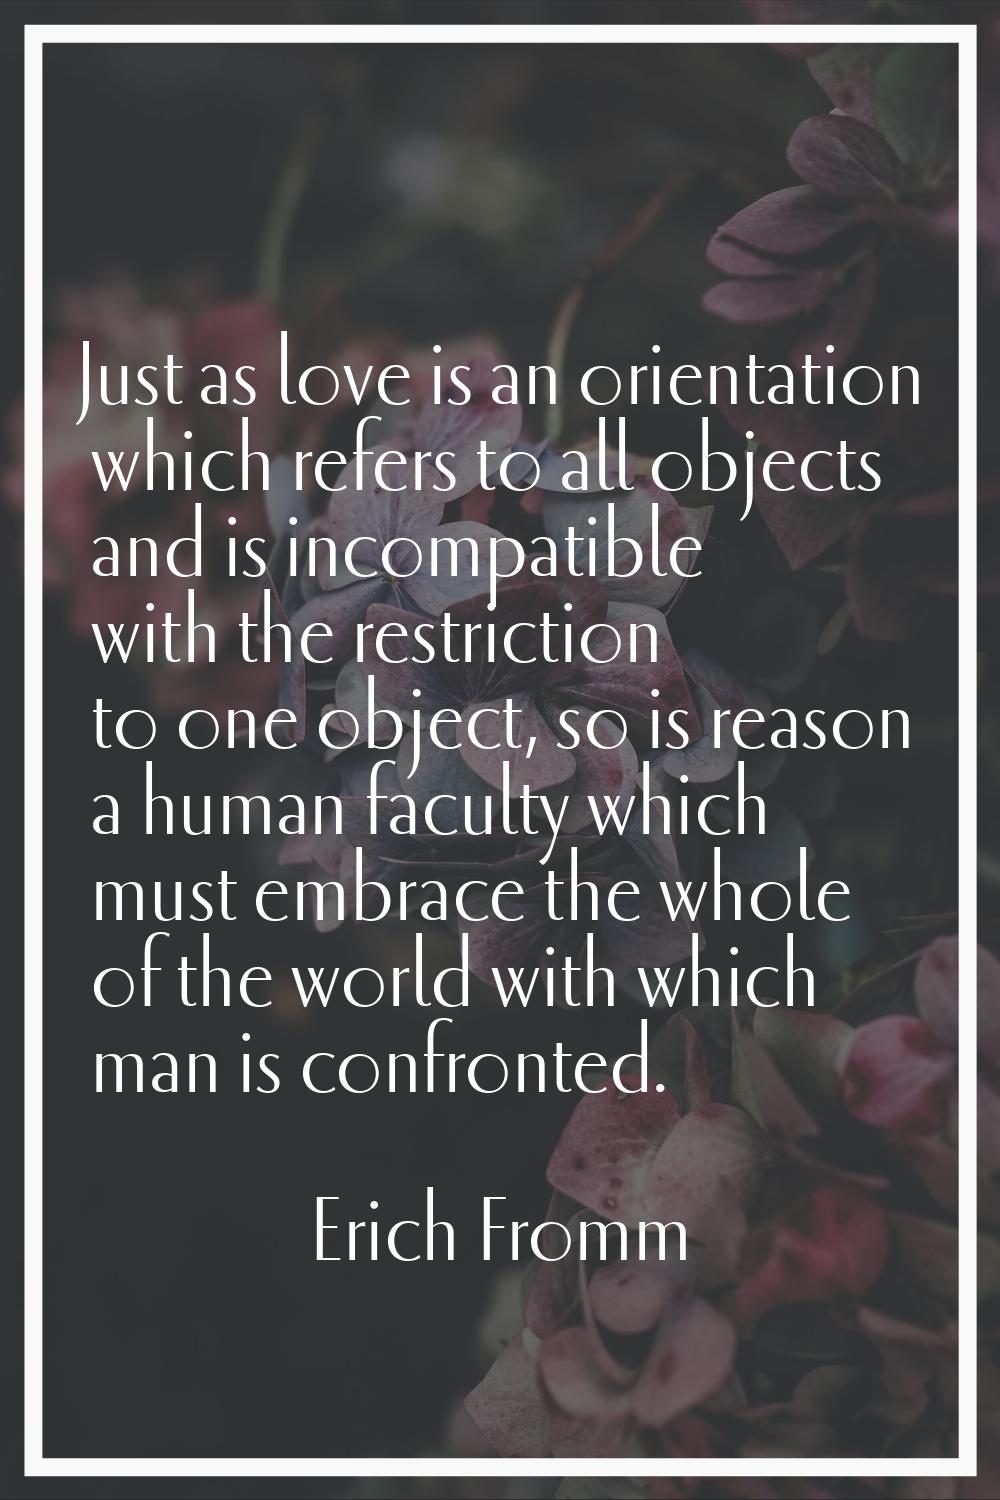 Just as love is an orientation which refers to all objects and is incompatible with the restriction